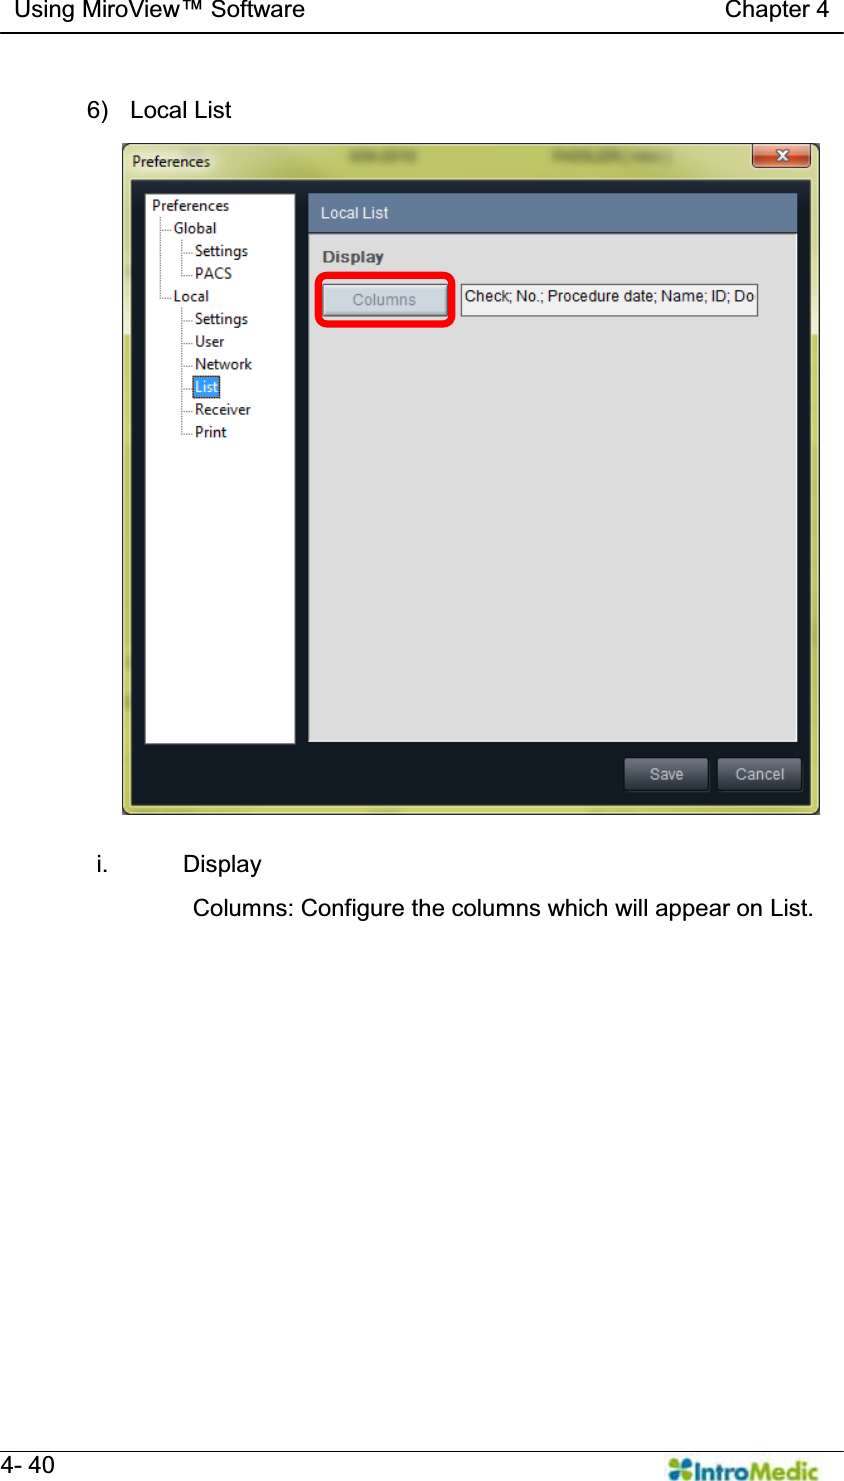   Using MiroView Software                                   Chapter 4   4- 40  6) Local List  i. Display Columns: Configure the columns which will appear on List. 